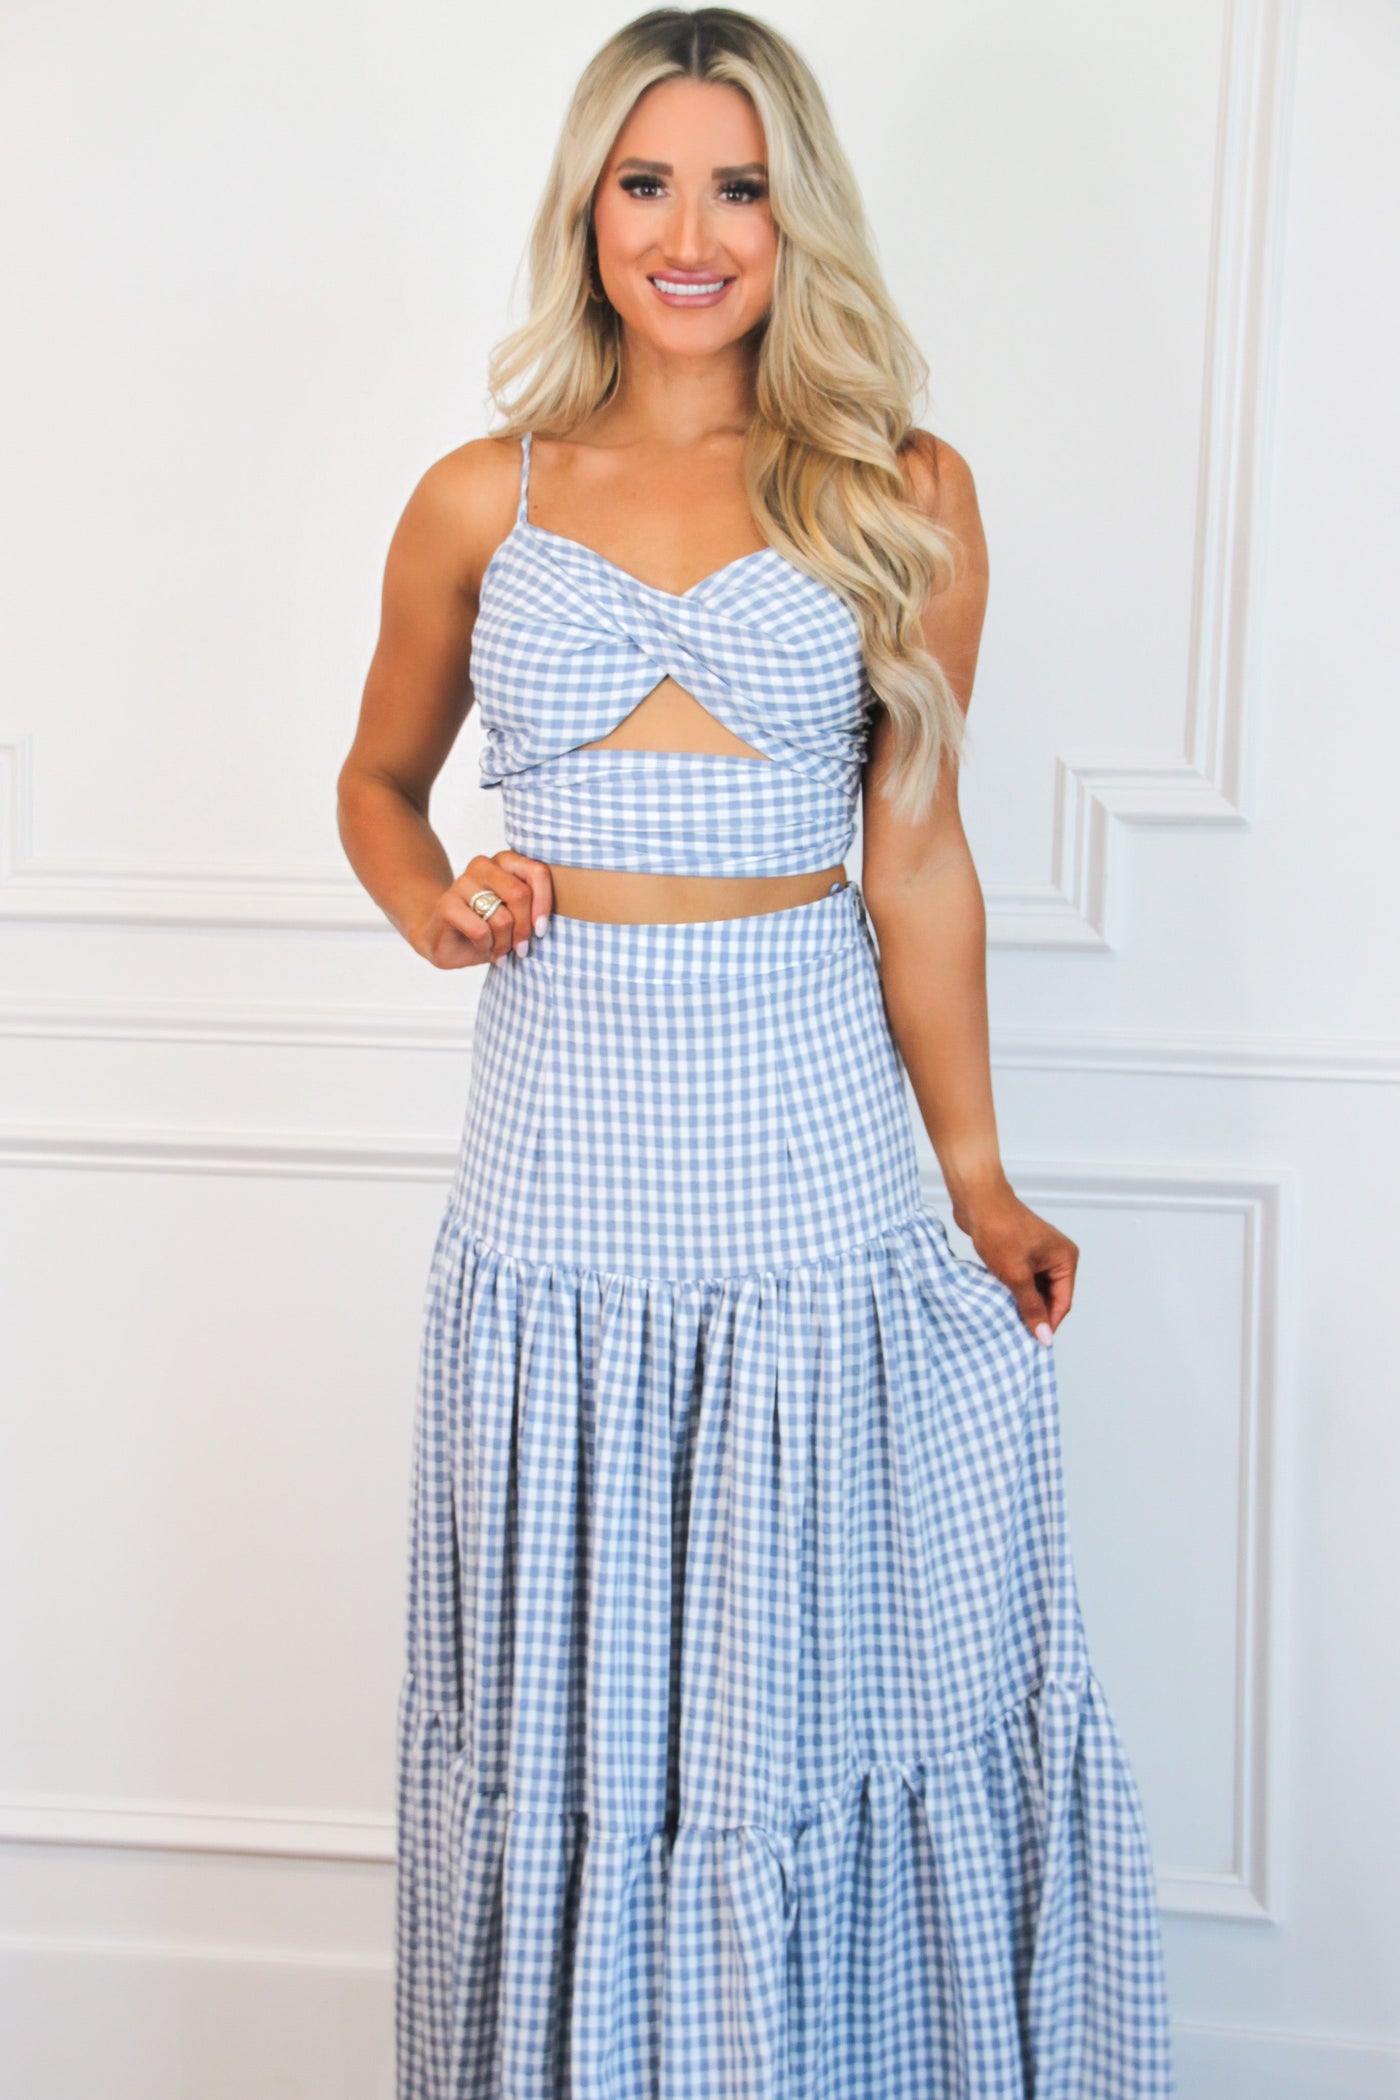 Picnic in the Park Two Piece Set: Indigo - Bella and Bloom Boutique